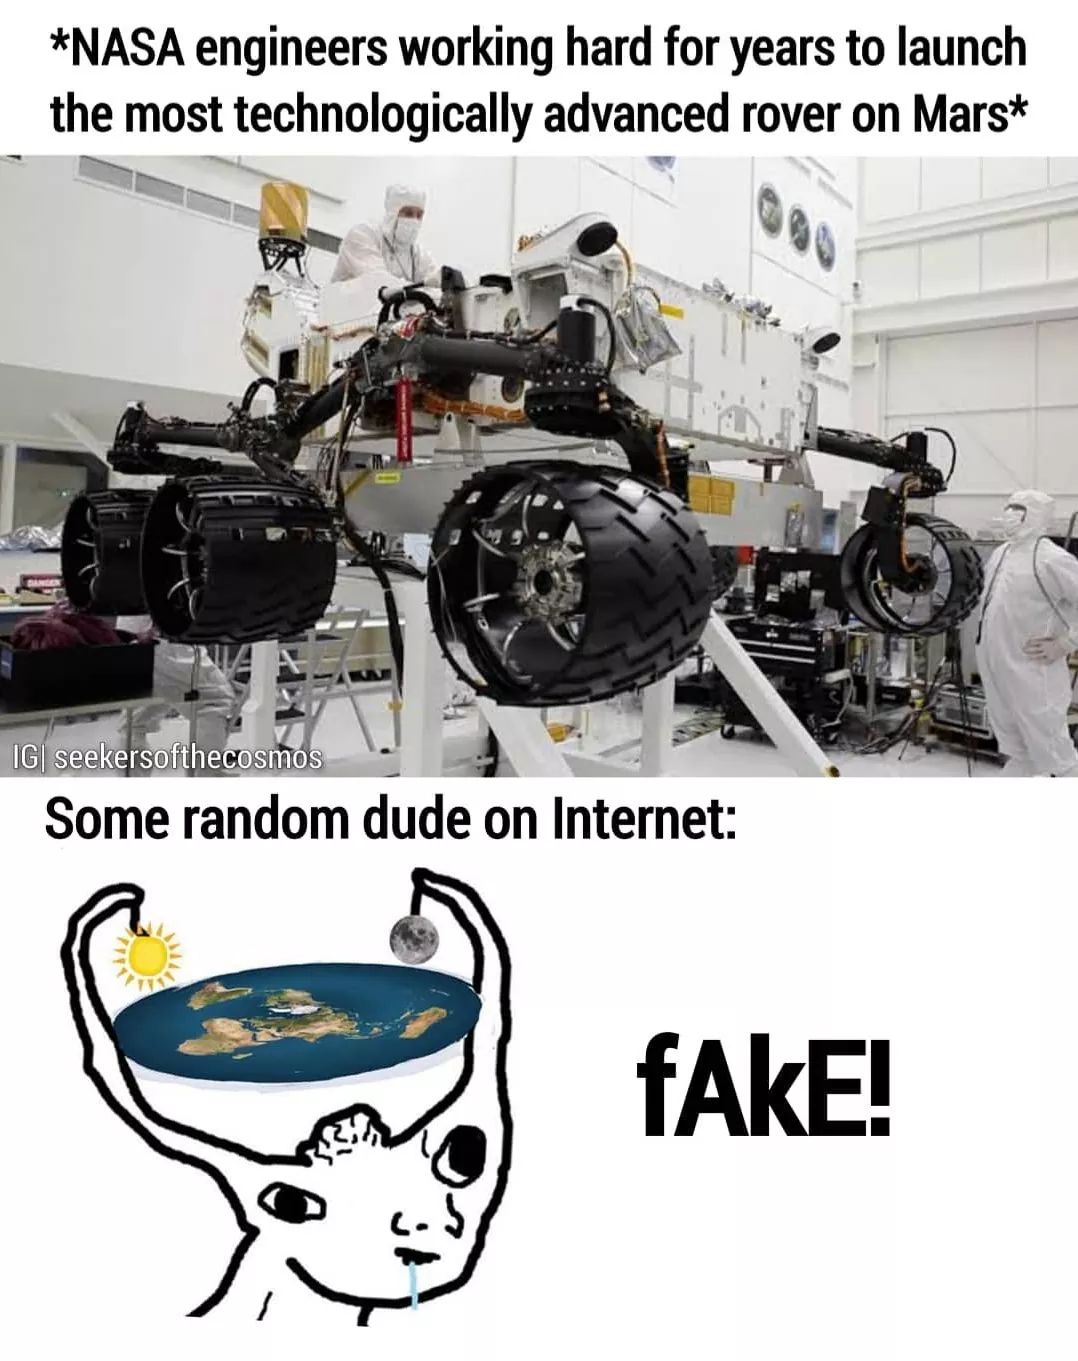 curiosity rover - Nasa engineers working hard for years to launch the most technologically advanced rover on Mars Ig| seekersofthecosmos Some random dude on Internet fAKE!